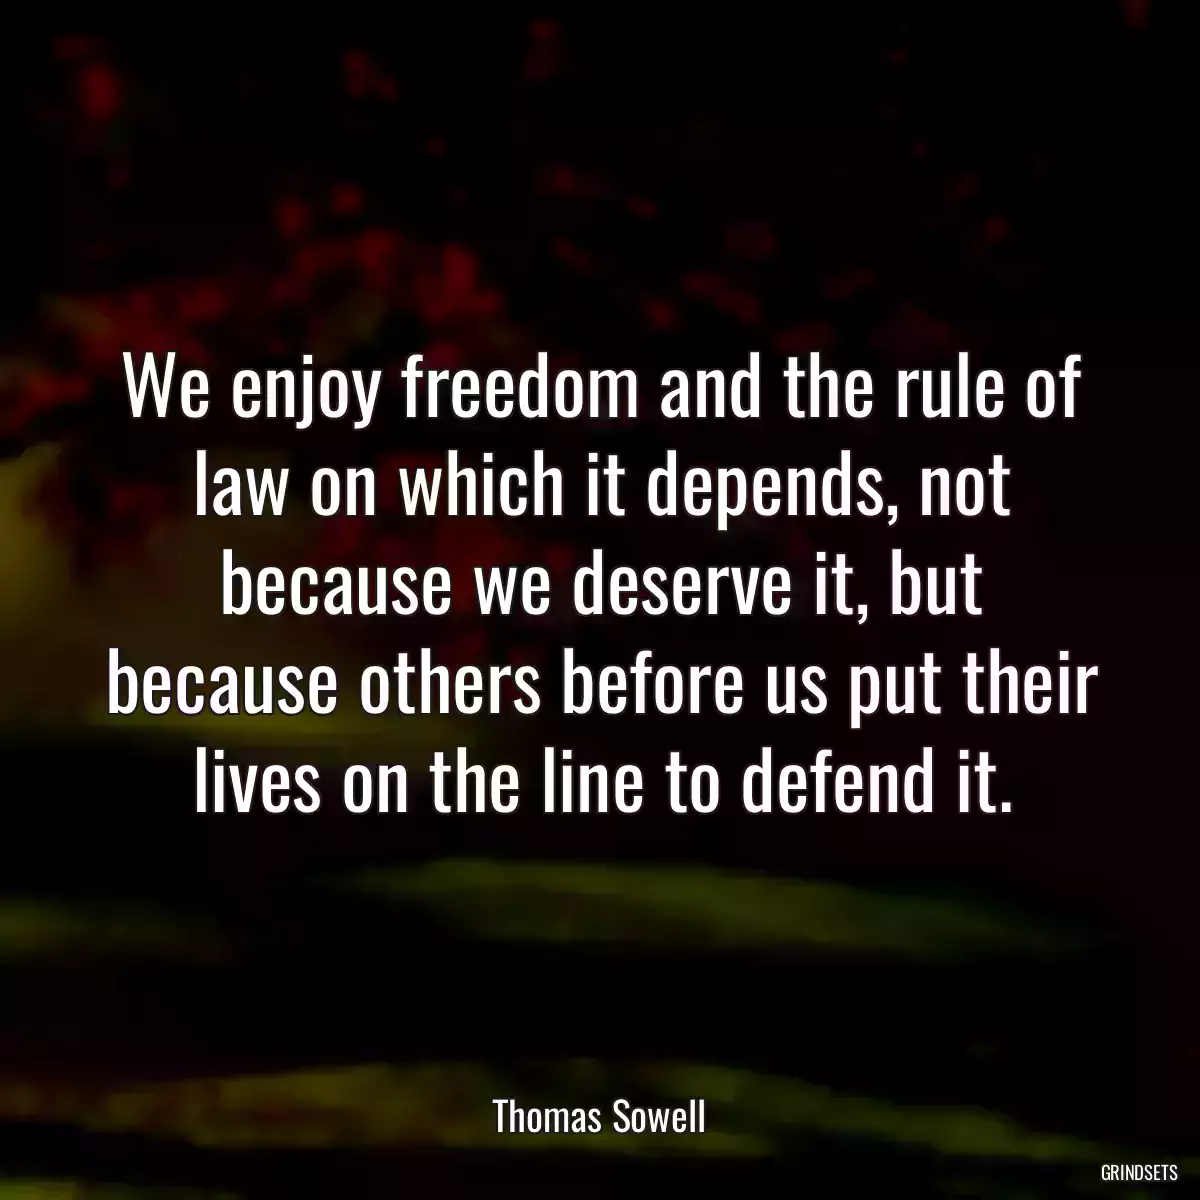 We enjoy freedom and the rule of law on which it depends, not because we deserve it, but because others before us put their lives on the line to defend it.